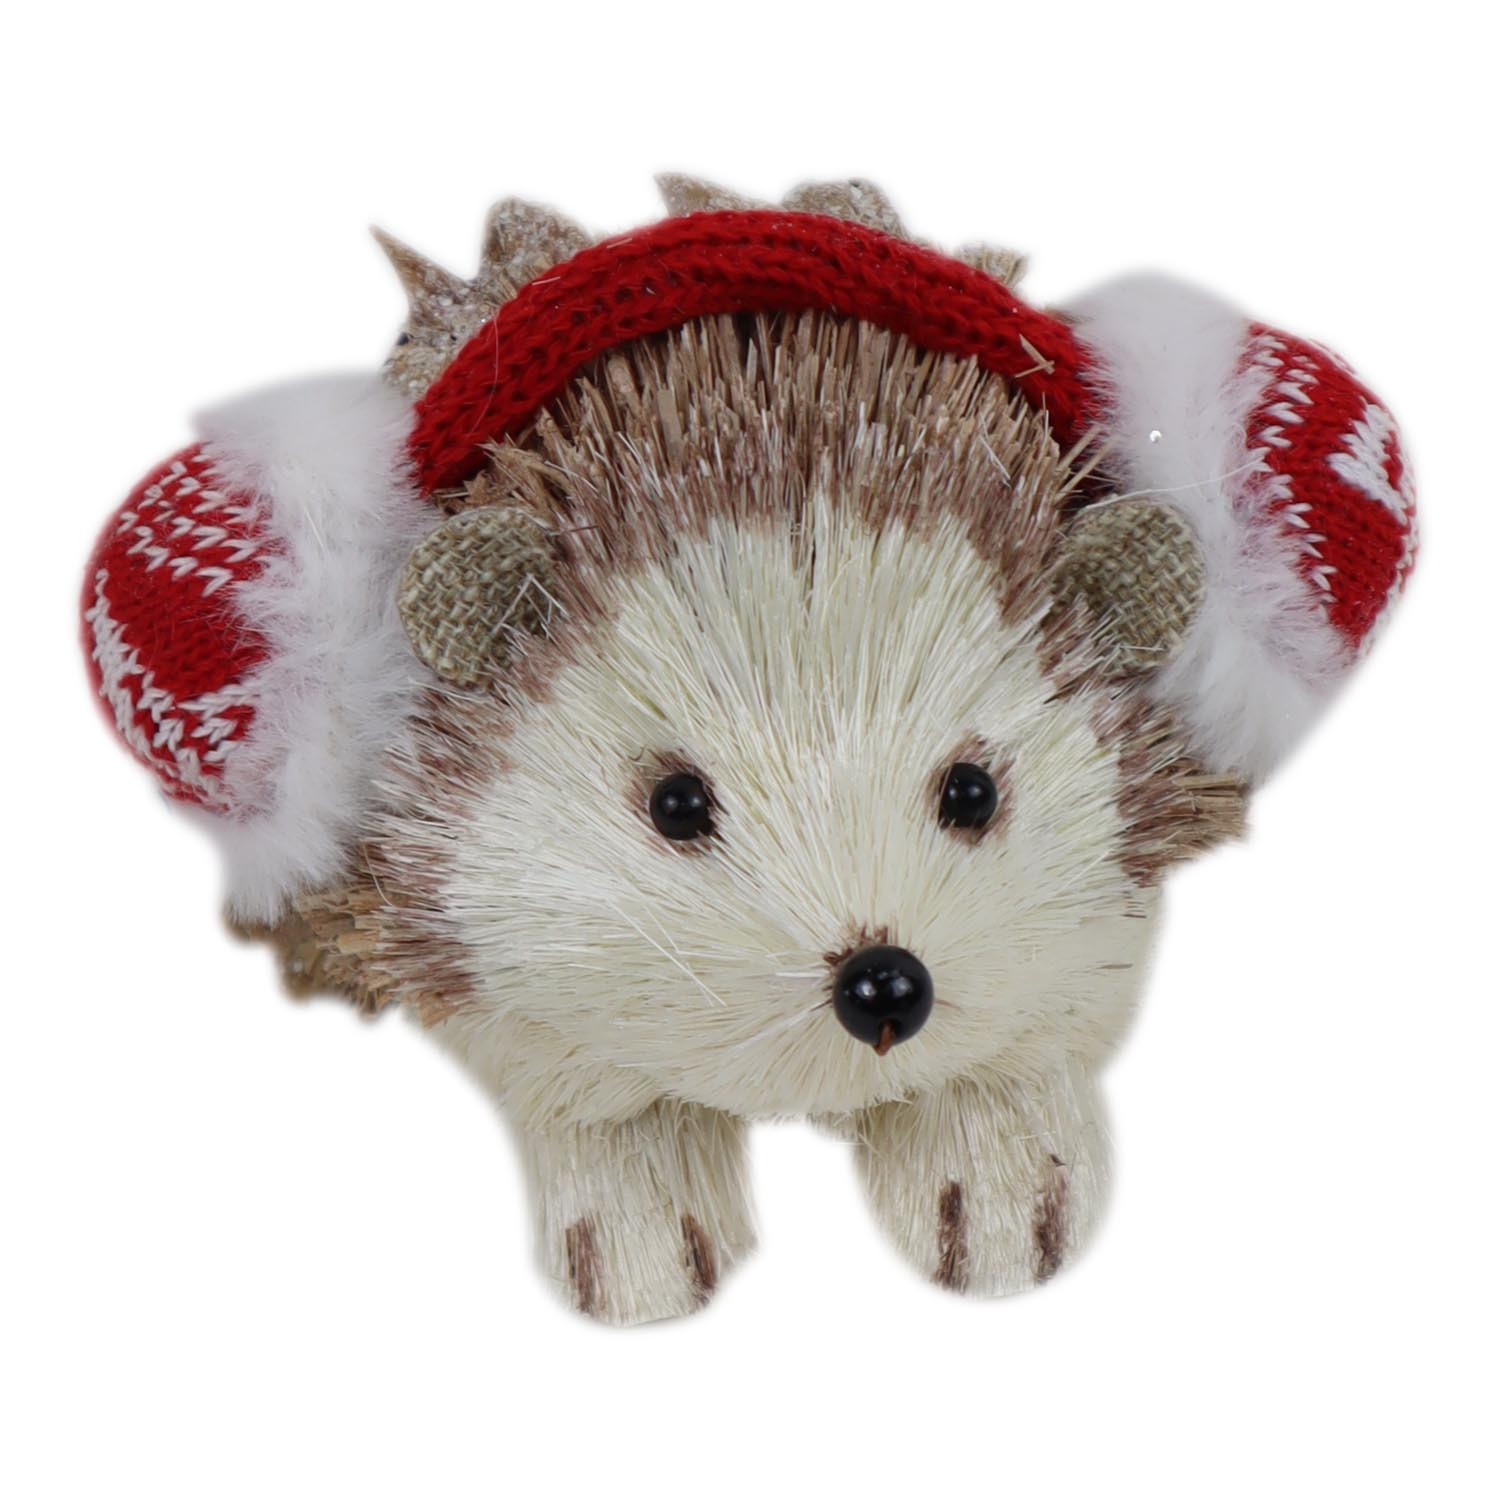 Hedgehog with Ear Muffs Ornament Image